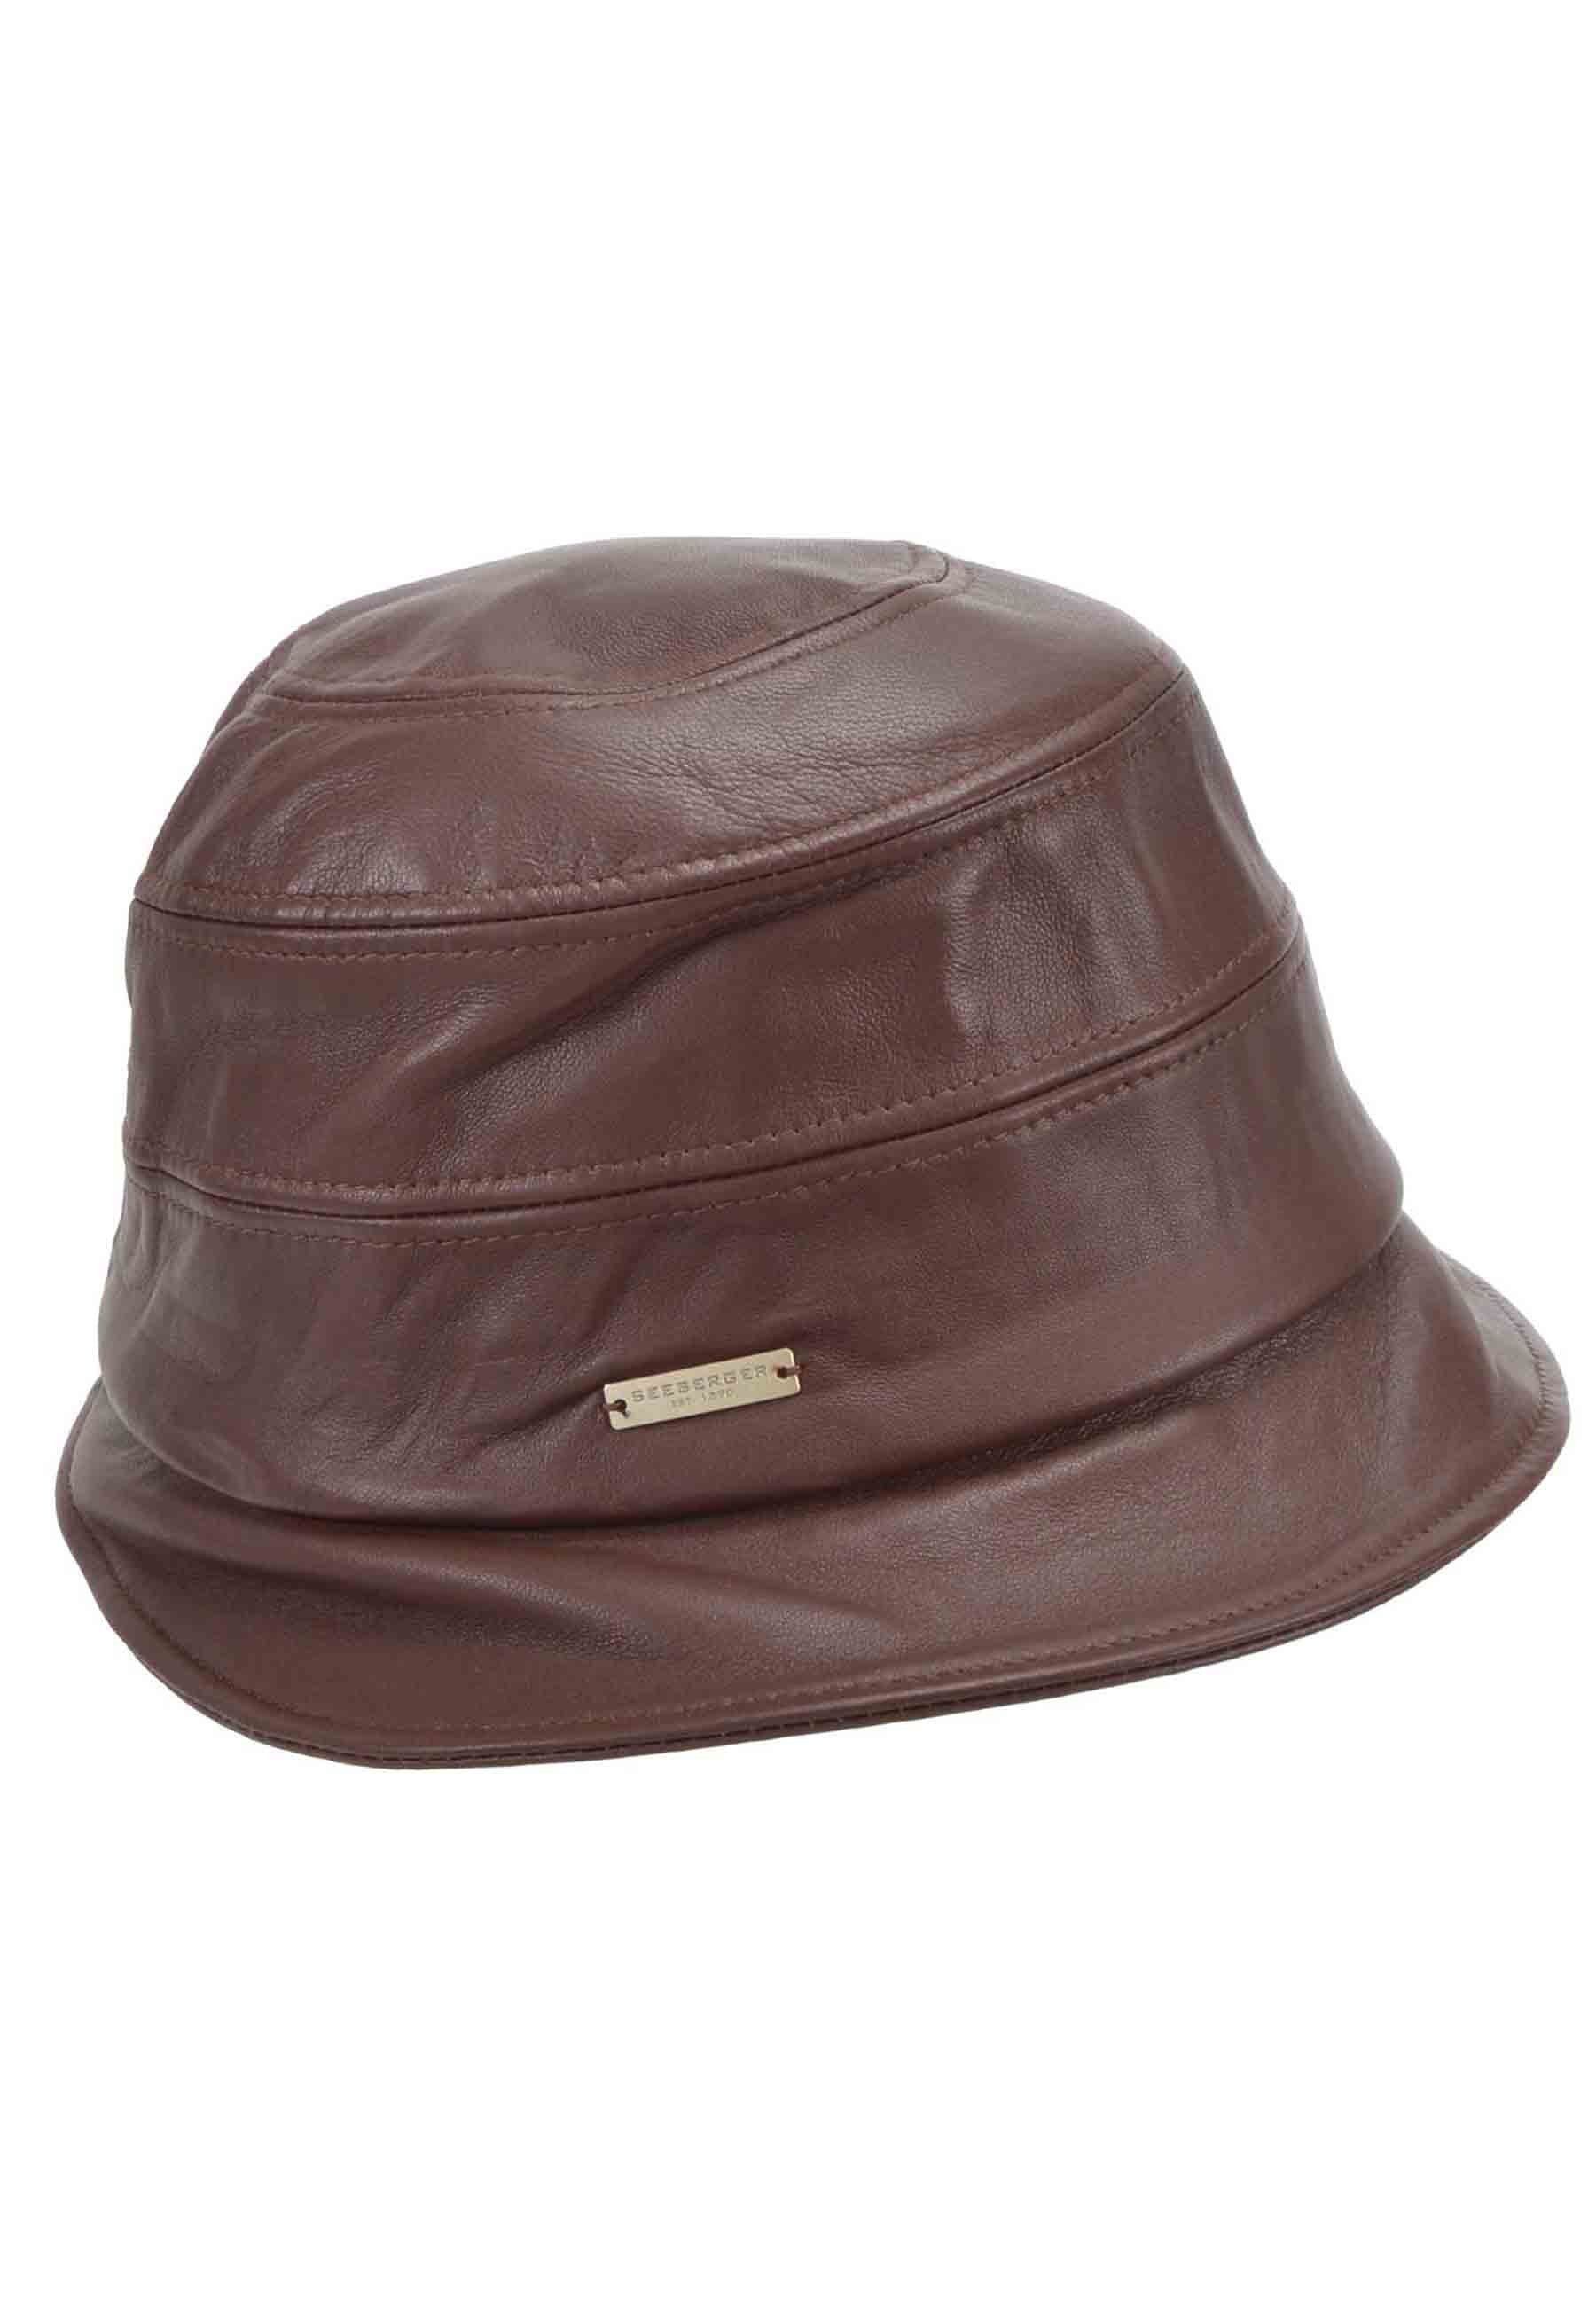 Women's brown leather cloche hat